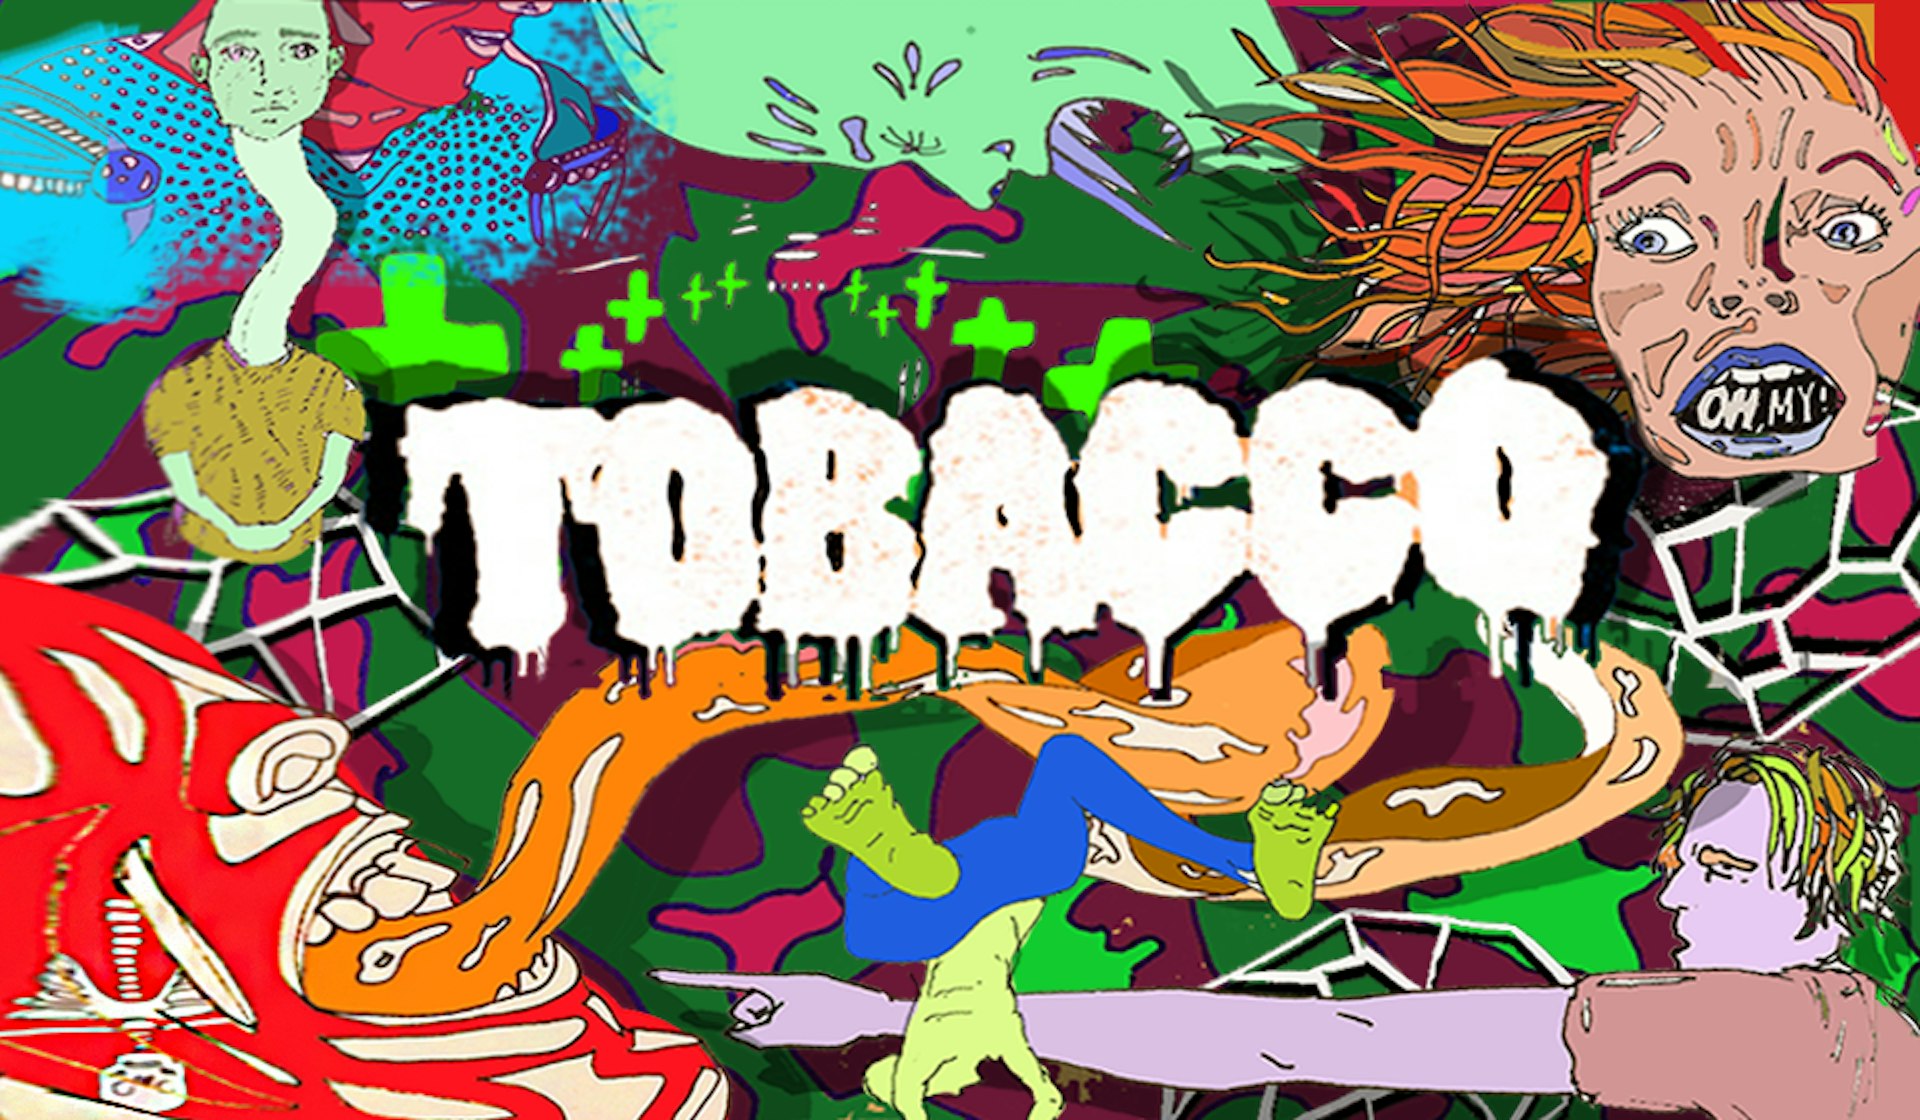 Tobacco: The enigmatic misfit wrecking pop music